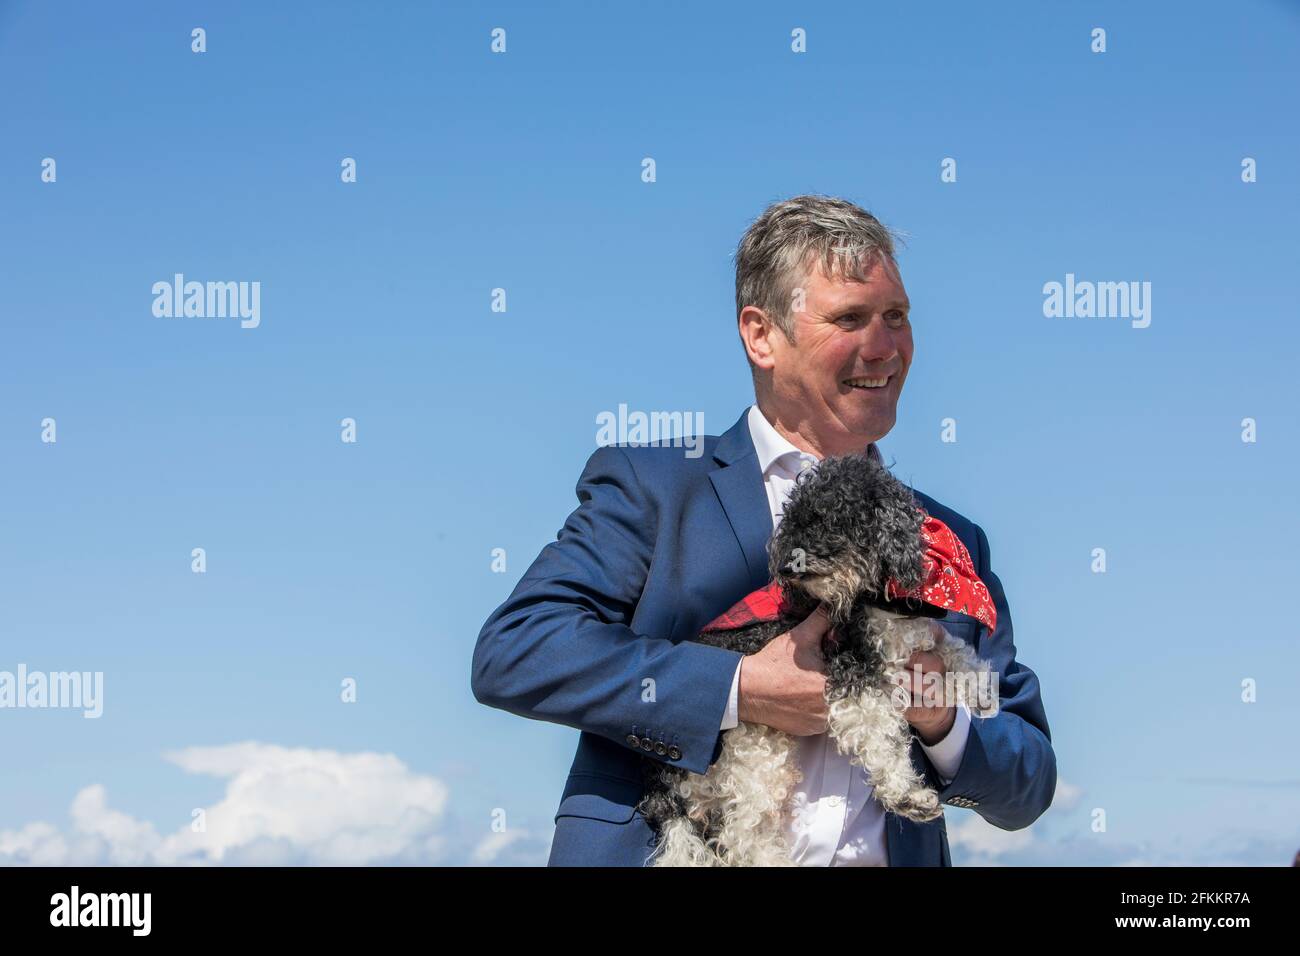 Leader of the Labour Party Sir Keir Starmer canvassing for Labour Candidate Dr Paul Williams in Seaton Carew. Stock Photo